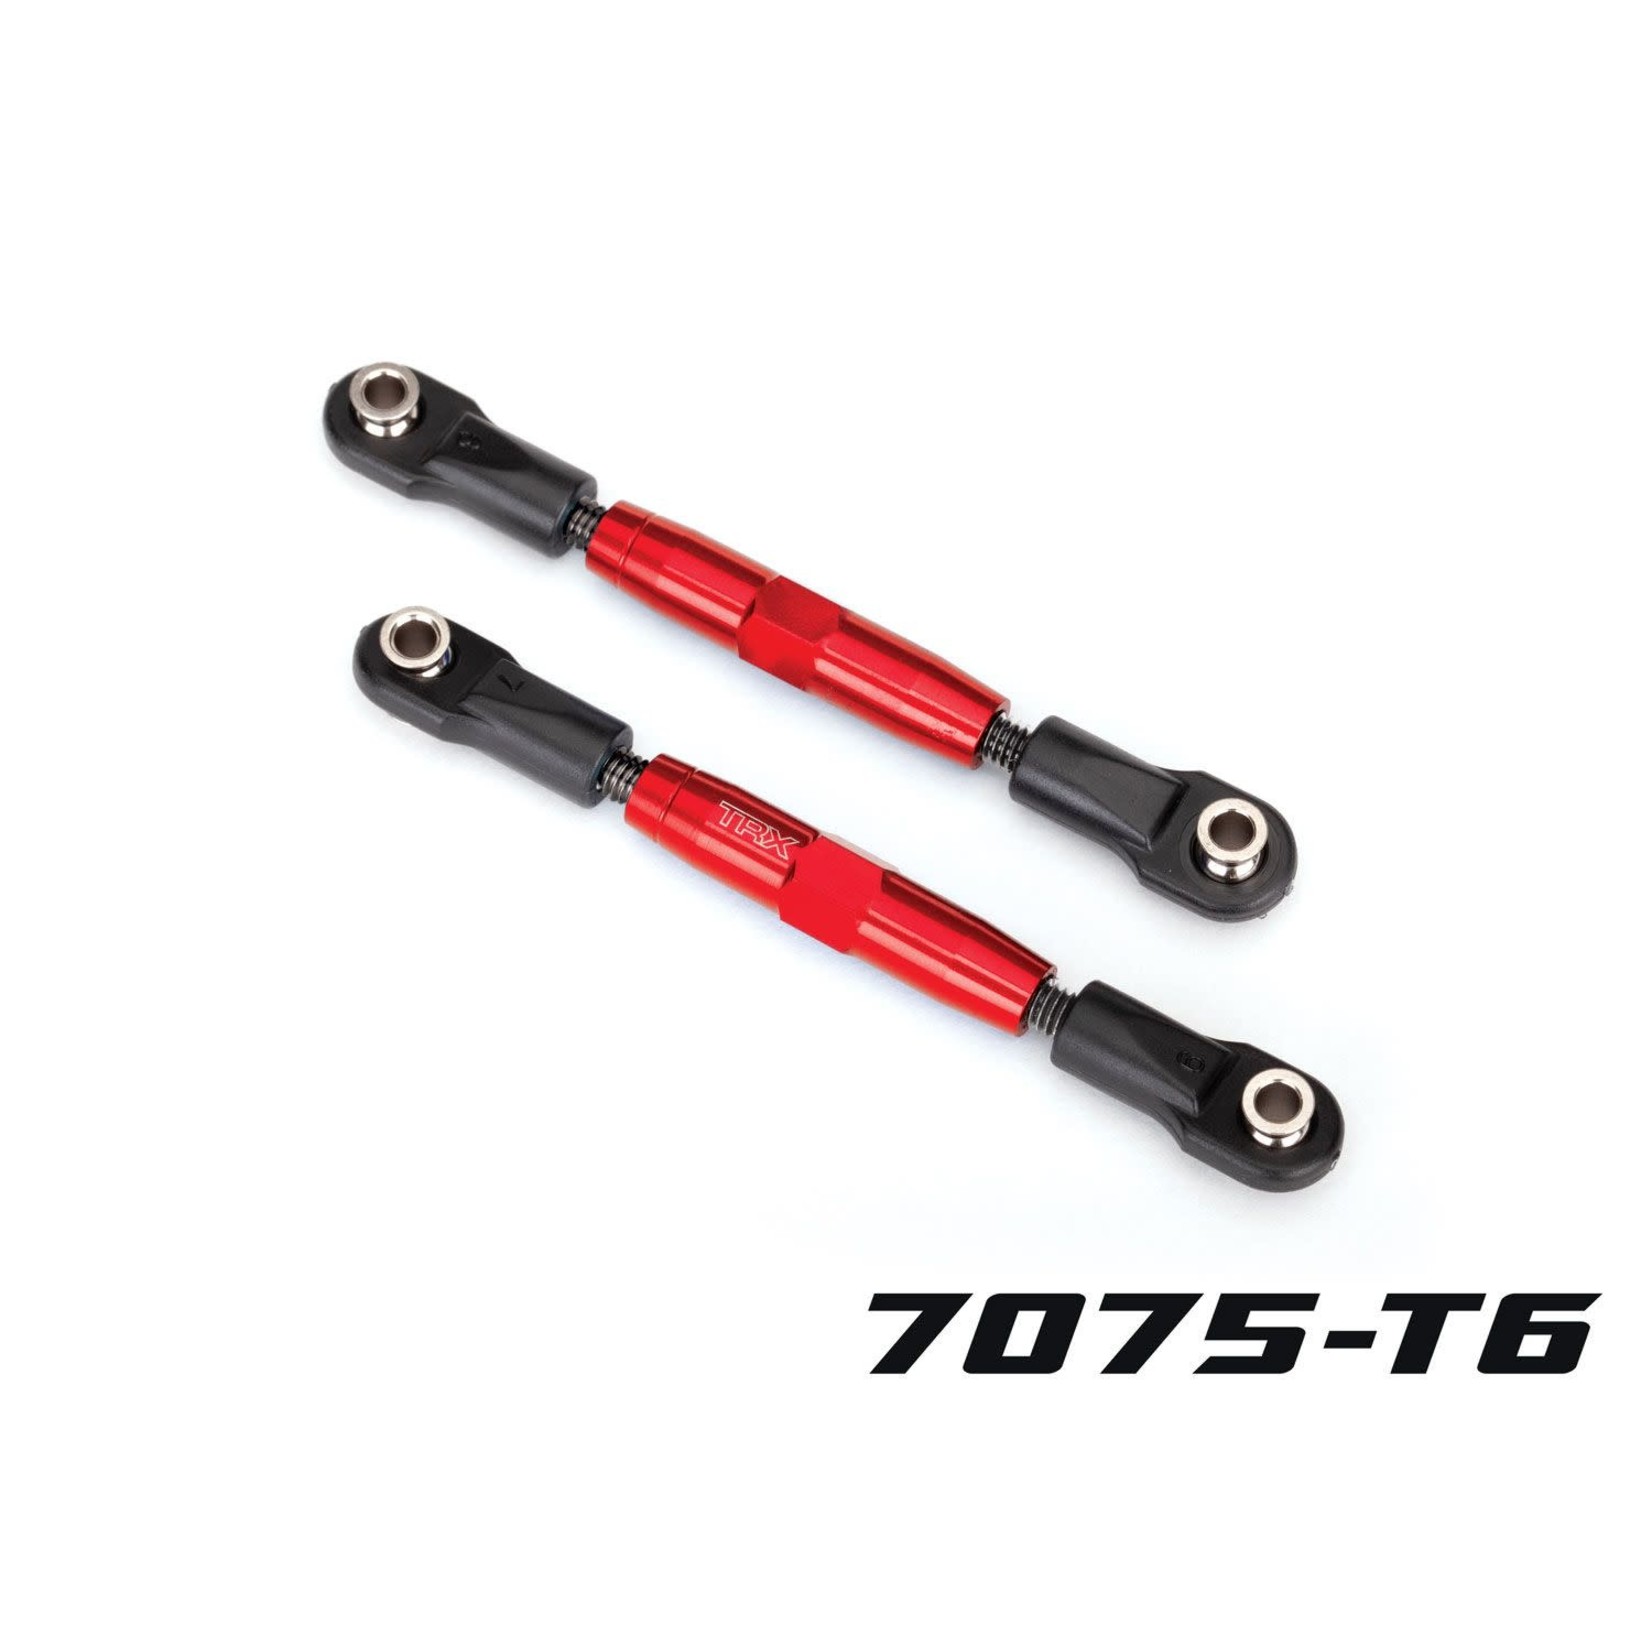 Traxxas Camber links, front (TUBES red-anodized, 7075-T6 aluminum, stronger than titanium) (83mm) (2)